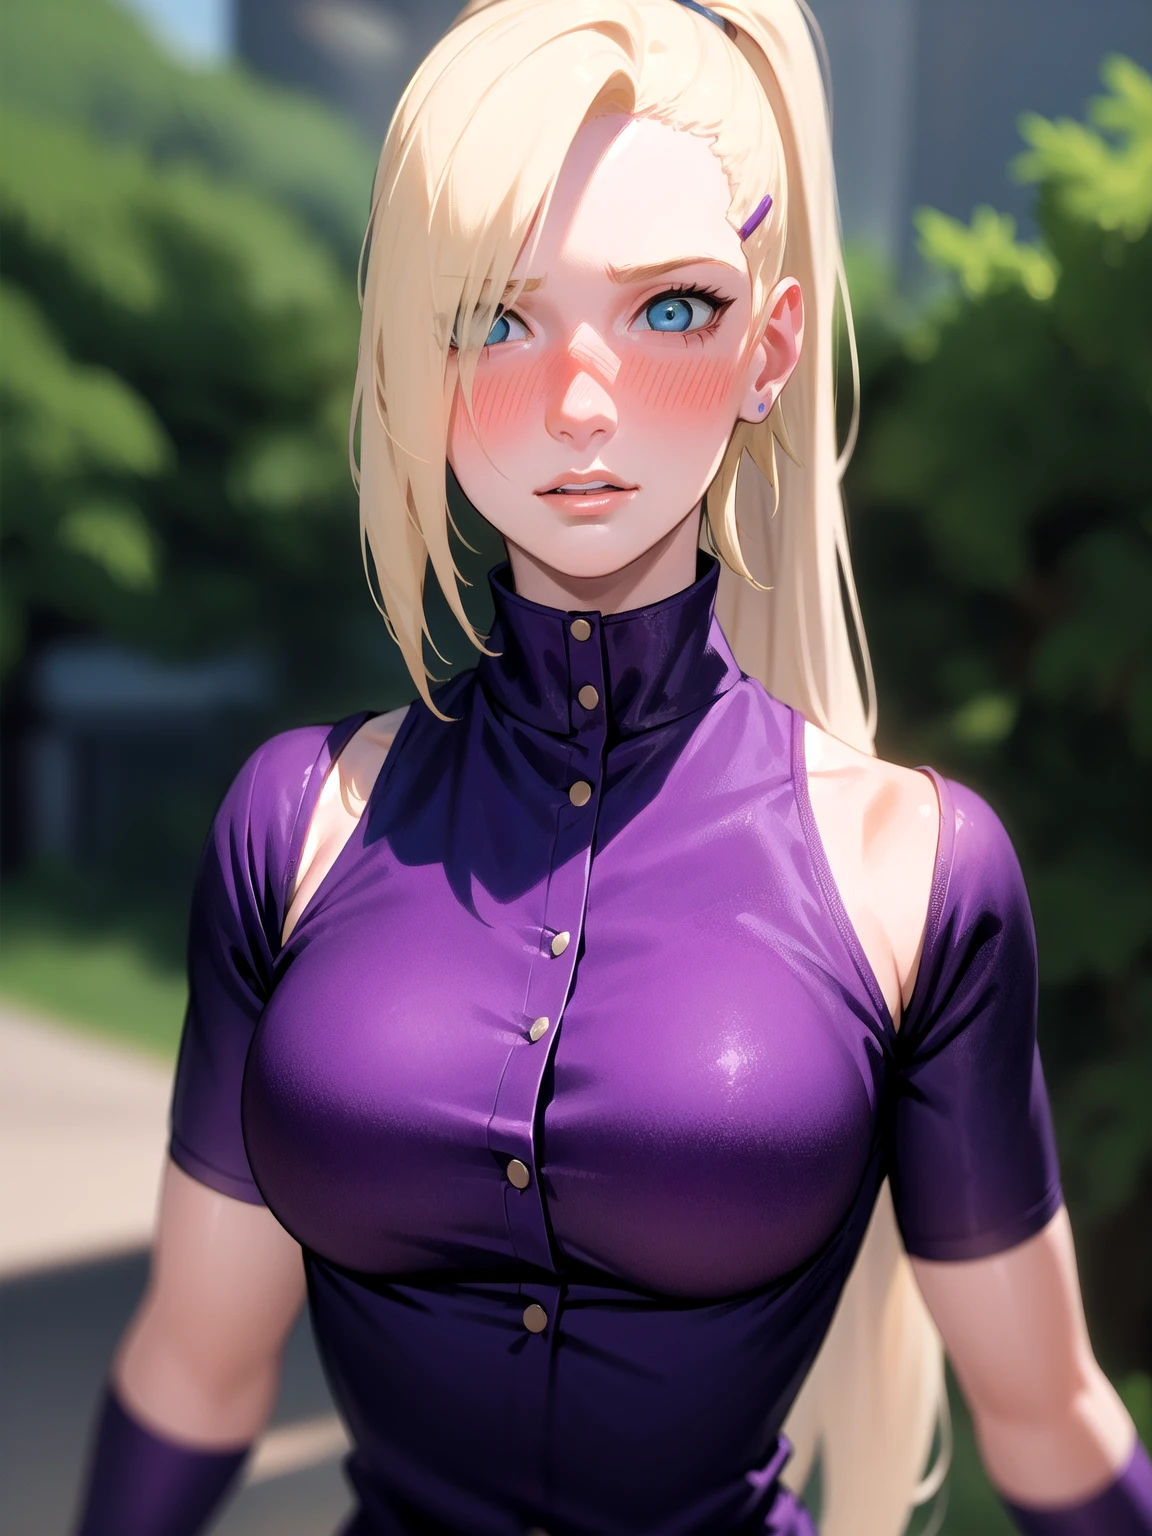 {-erro_de_anatomia:1.0} estilo anime, Masterpiece, absurdities, Yamanaka Ino\(Naruto\), 1girl Solo, woman, Perfect composition, Detailed lips, Beautiful face, body proportion, Blush, Long blonde hair, blue eyes, purple blouse, purple pant, Soft gauze, Super realistic, Detailed, photo shoot, Realistic faces and bodies, masterpiece, best quality, best illustration, hyper detailed, 1 woman, solo, glamorous, blushing, upper body, fighting, on nature, look at the view, dimanic poses